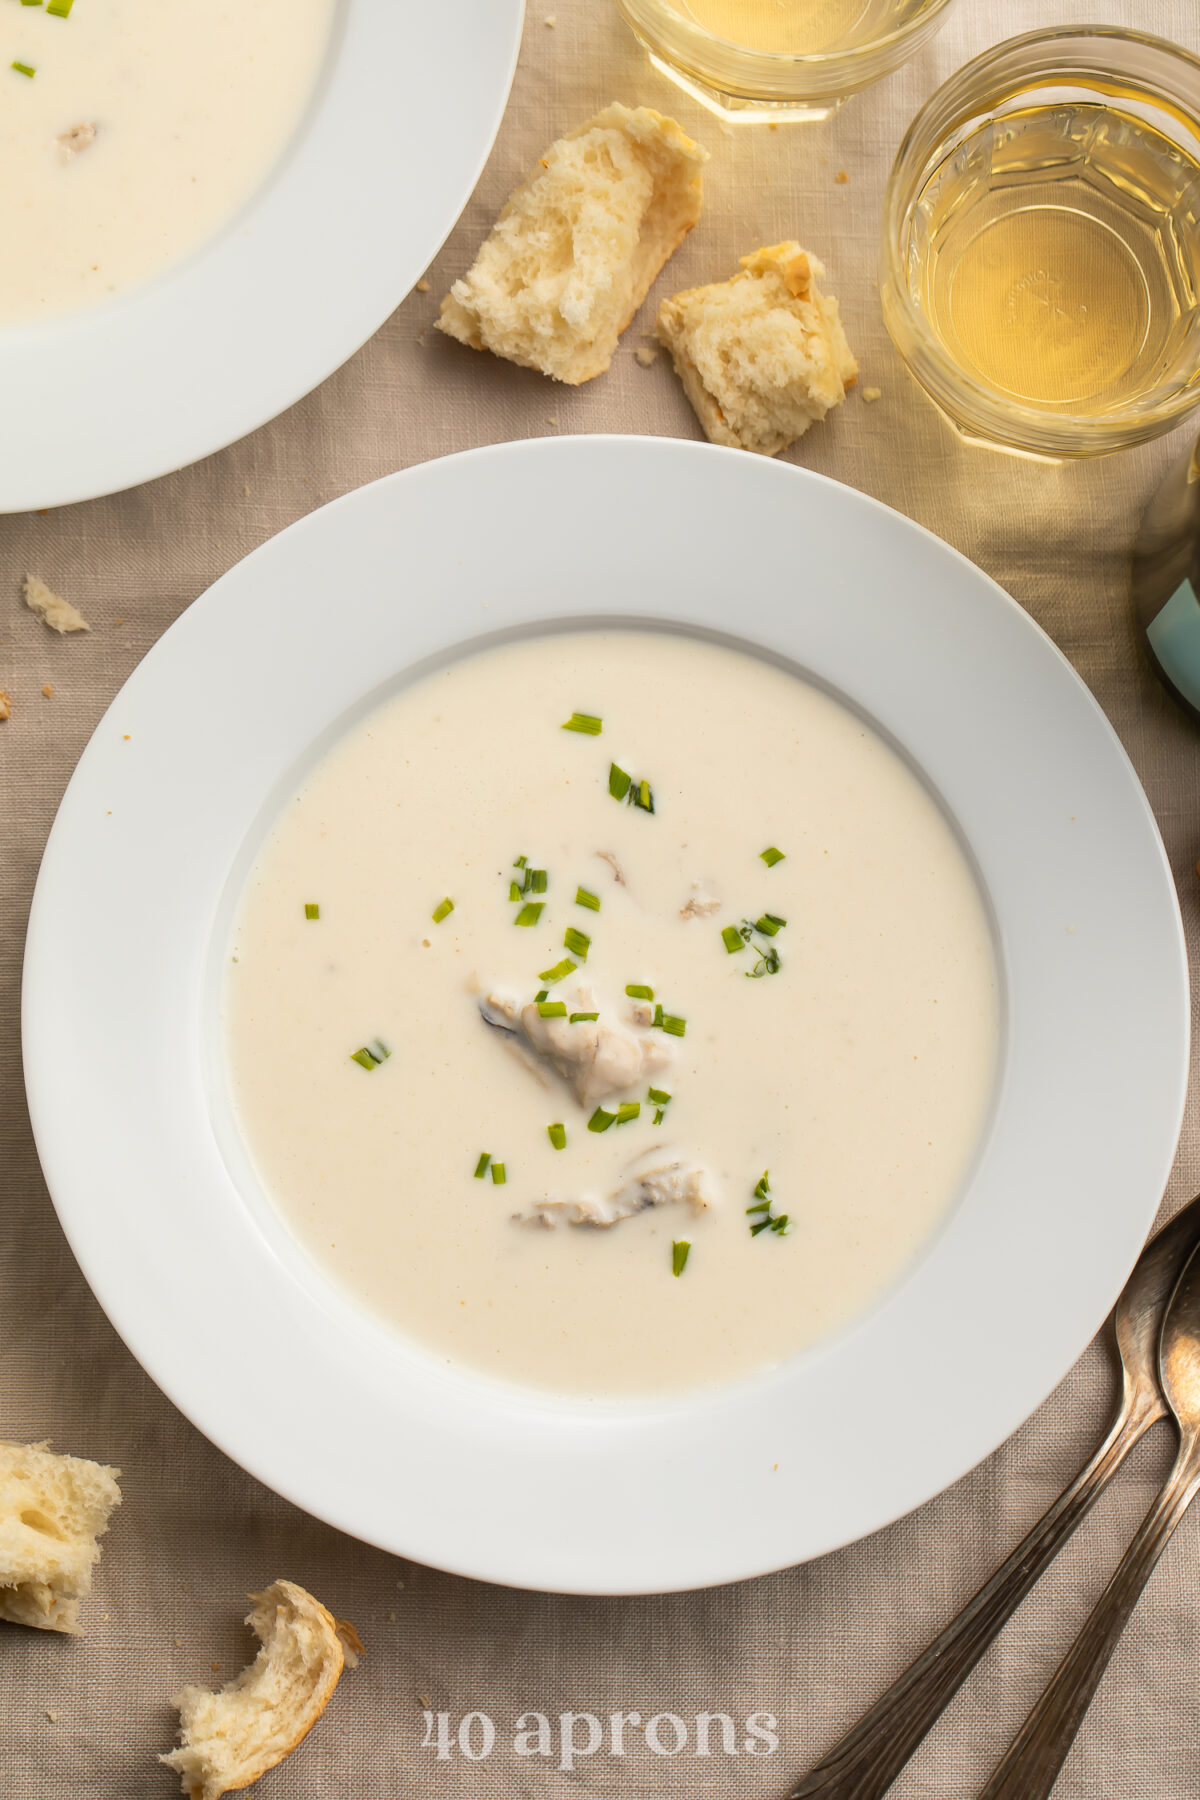 A white, restaurant-style bone soup bowl holding creamy, pale oyster brie soup dotted with green chives.